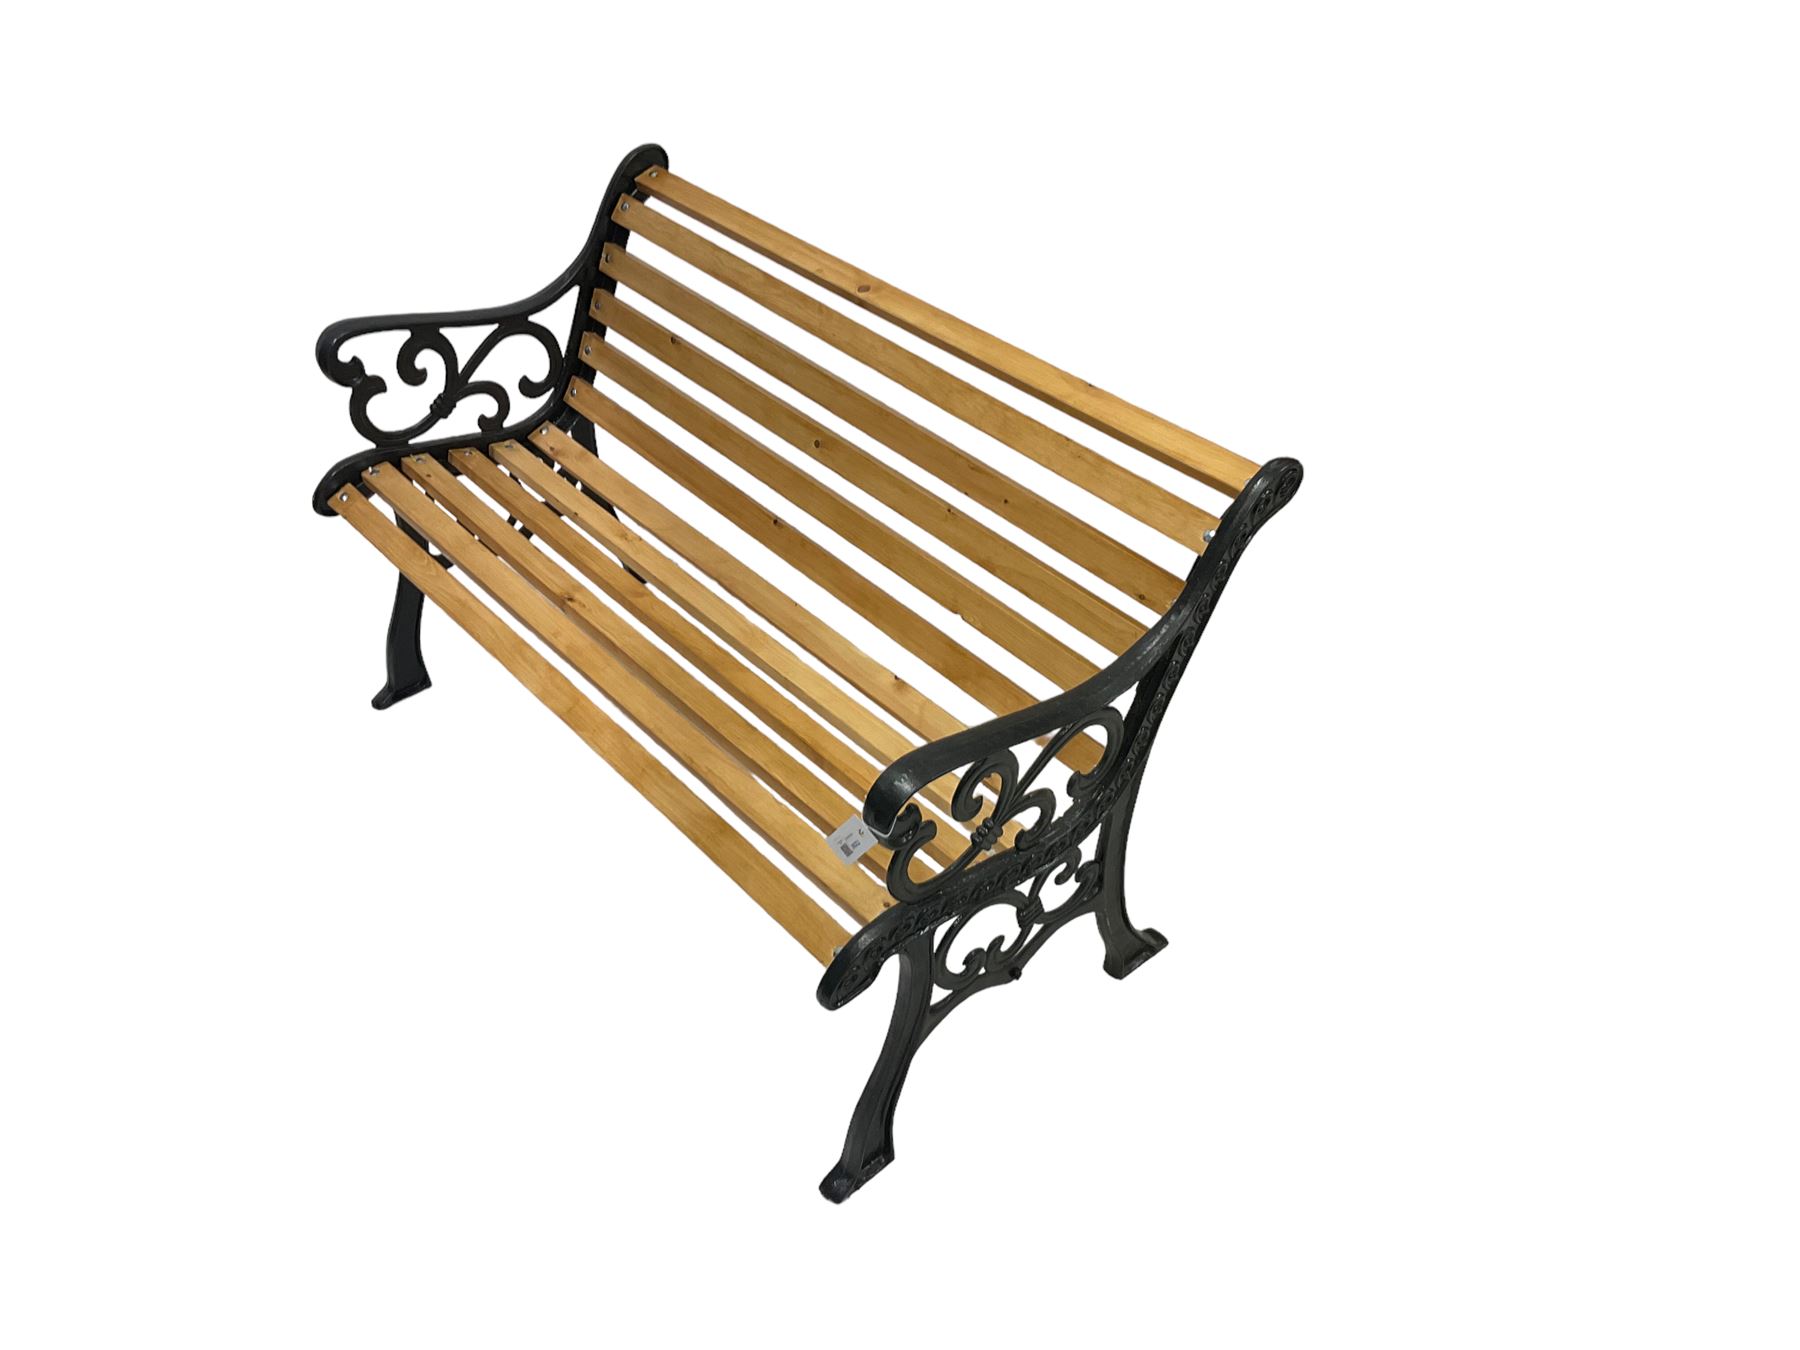 Black painted cast iron and wood slated garden bench - Image 4 of 7